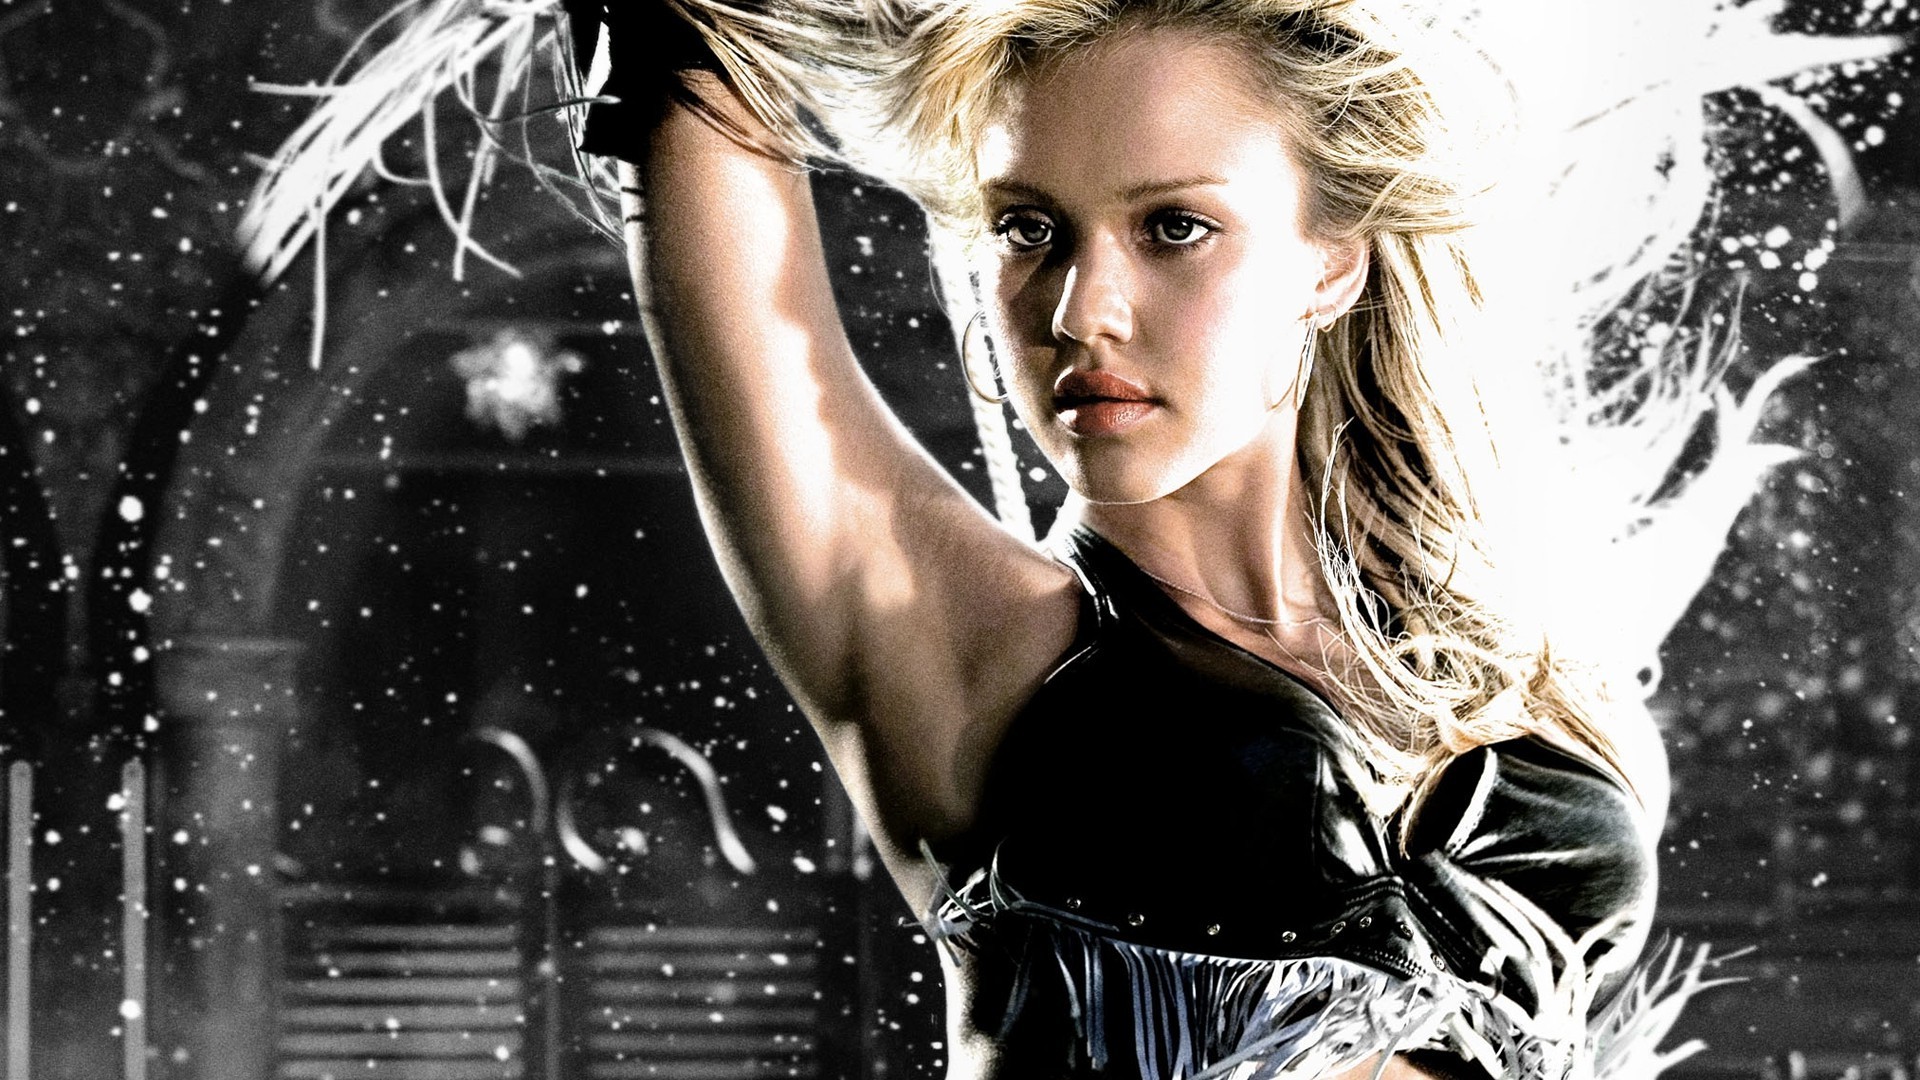 Movies Sin City Jessica Alba Wallpapers Hd Desktop And Mobile Backgrounds